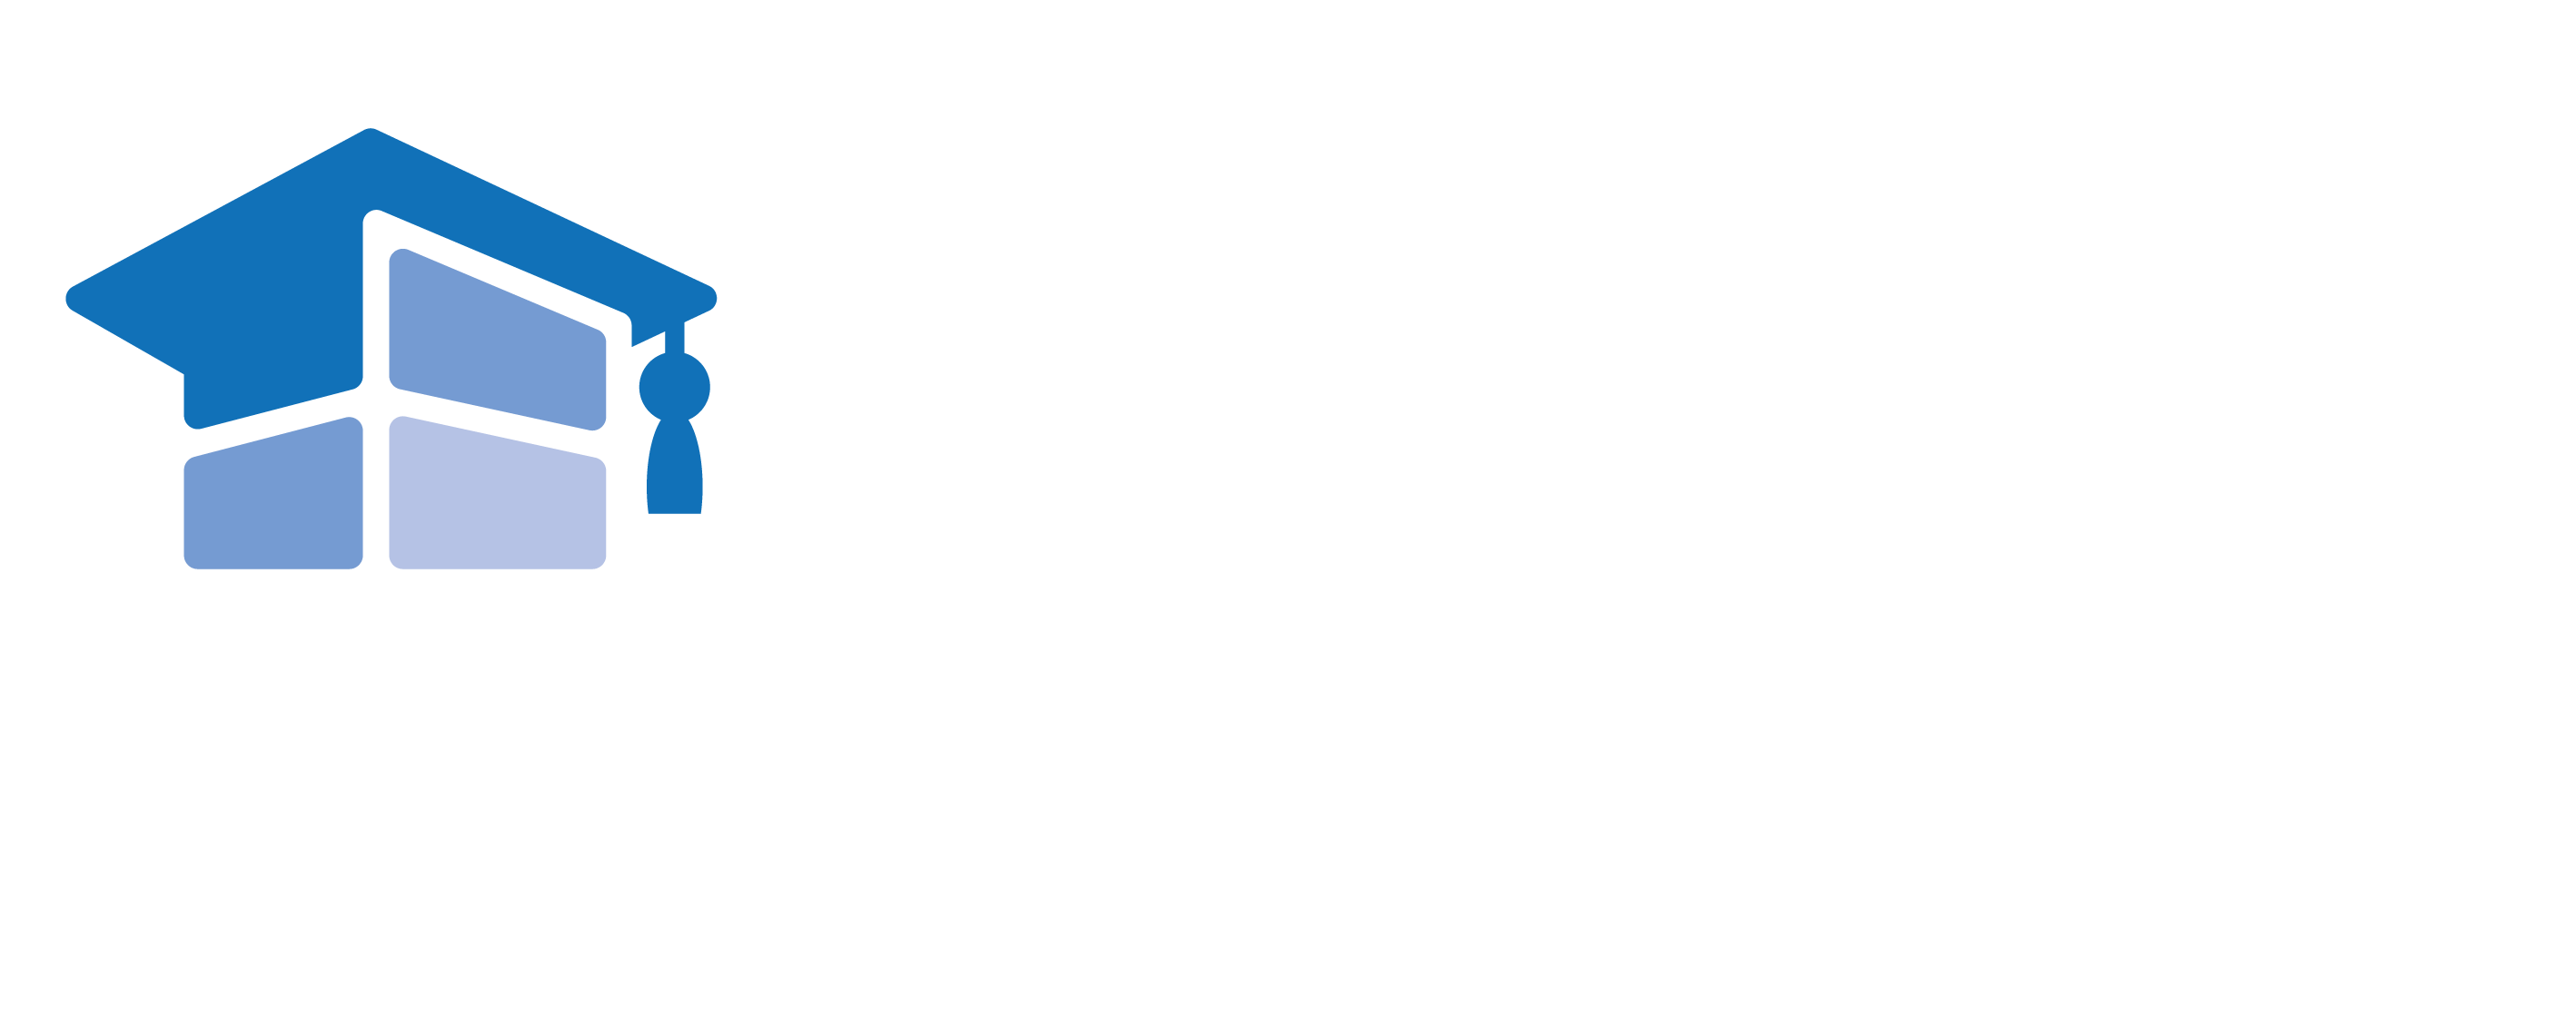 LPS One Day Conference 2024 logo